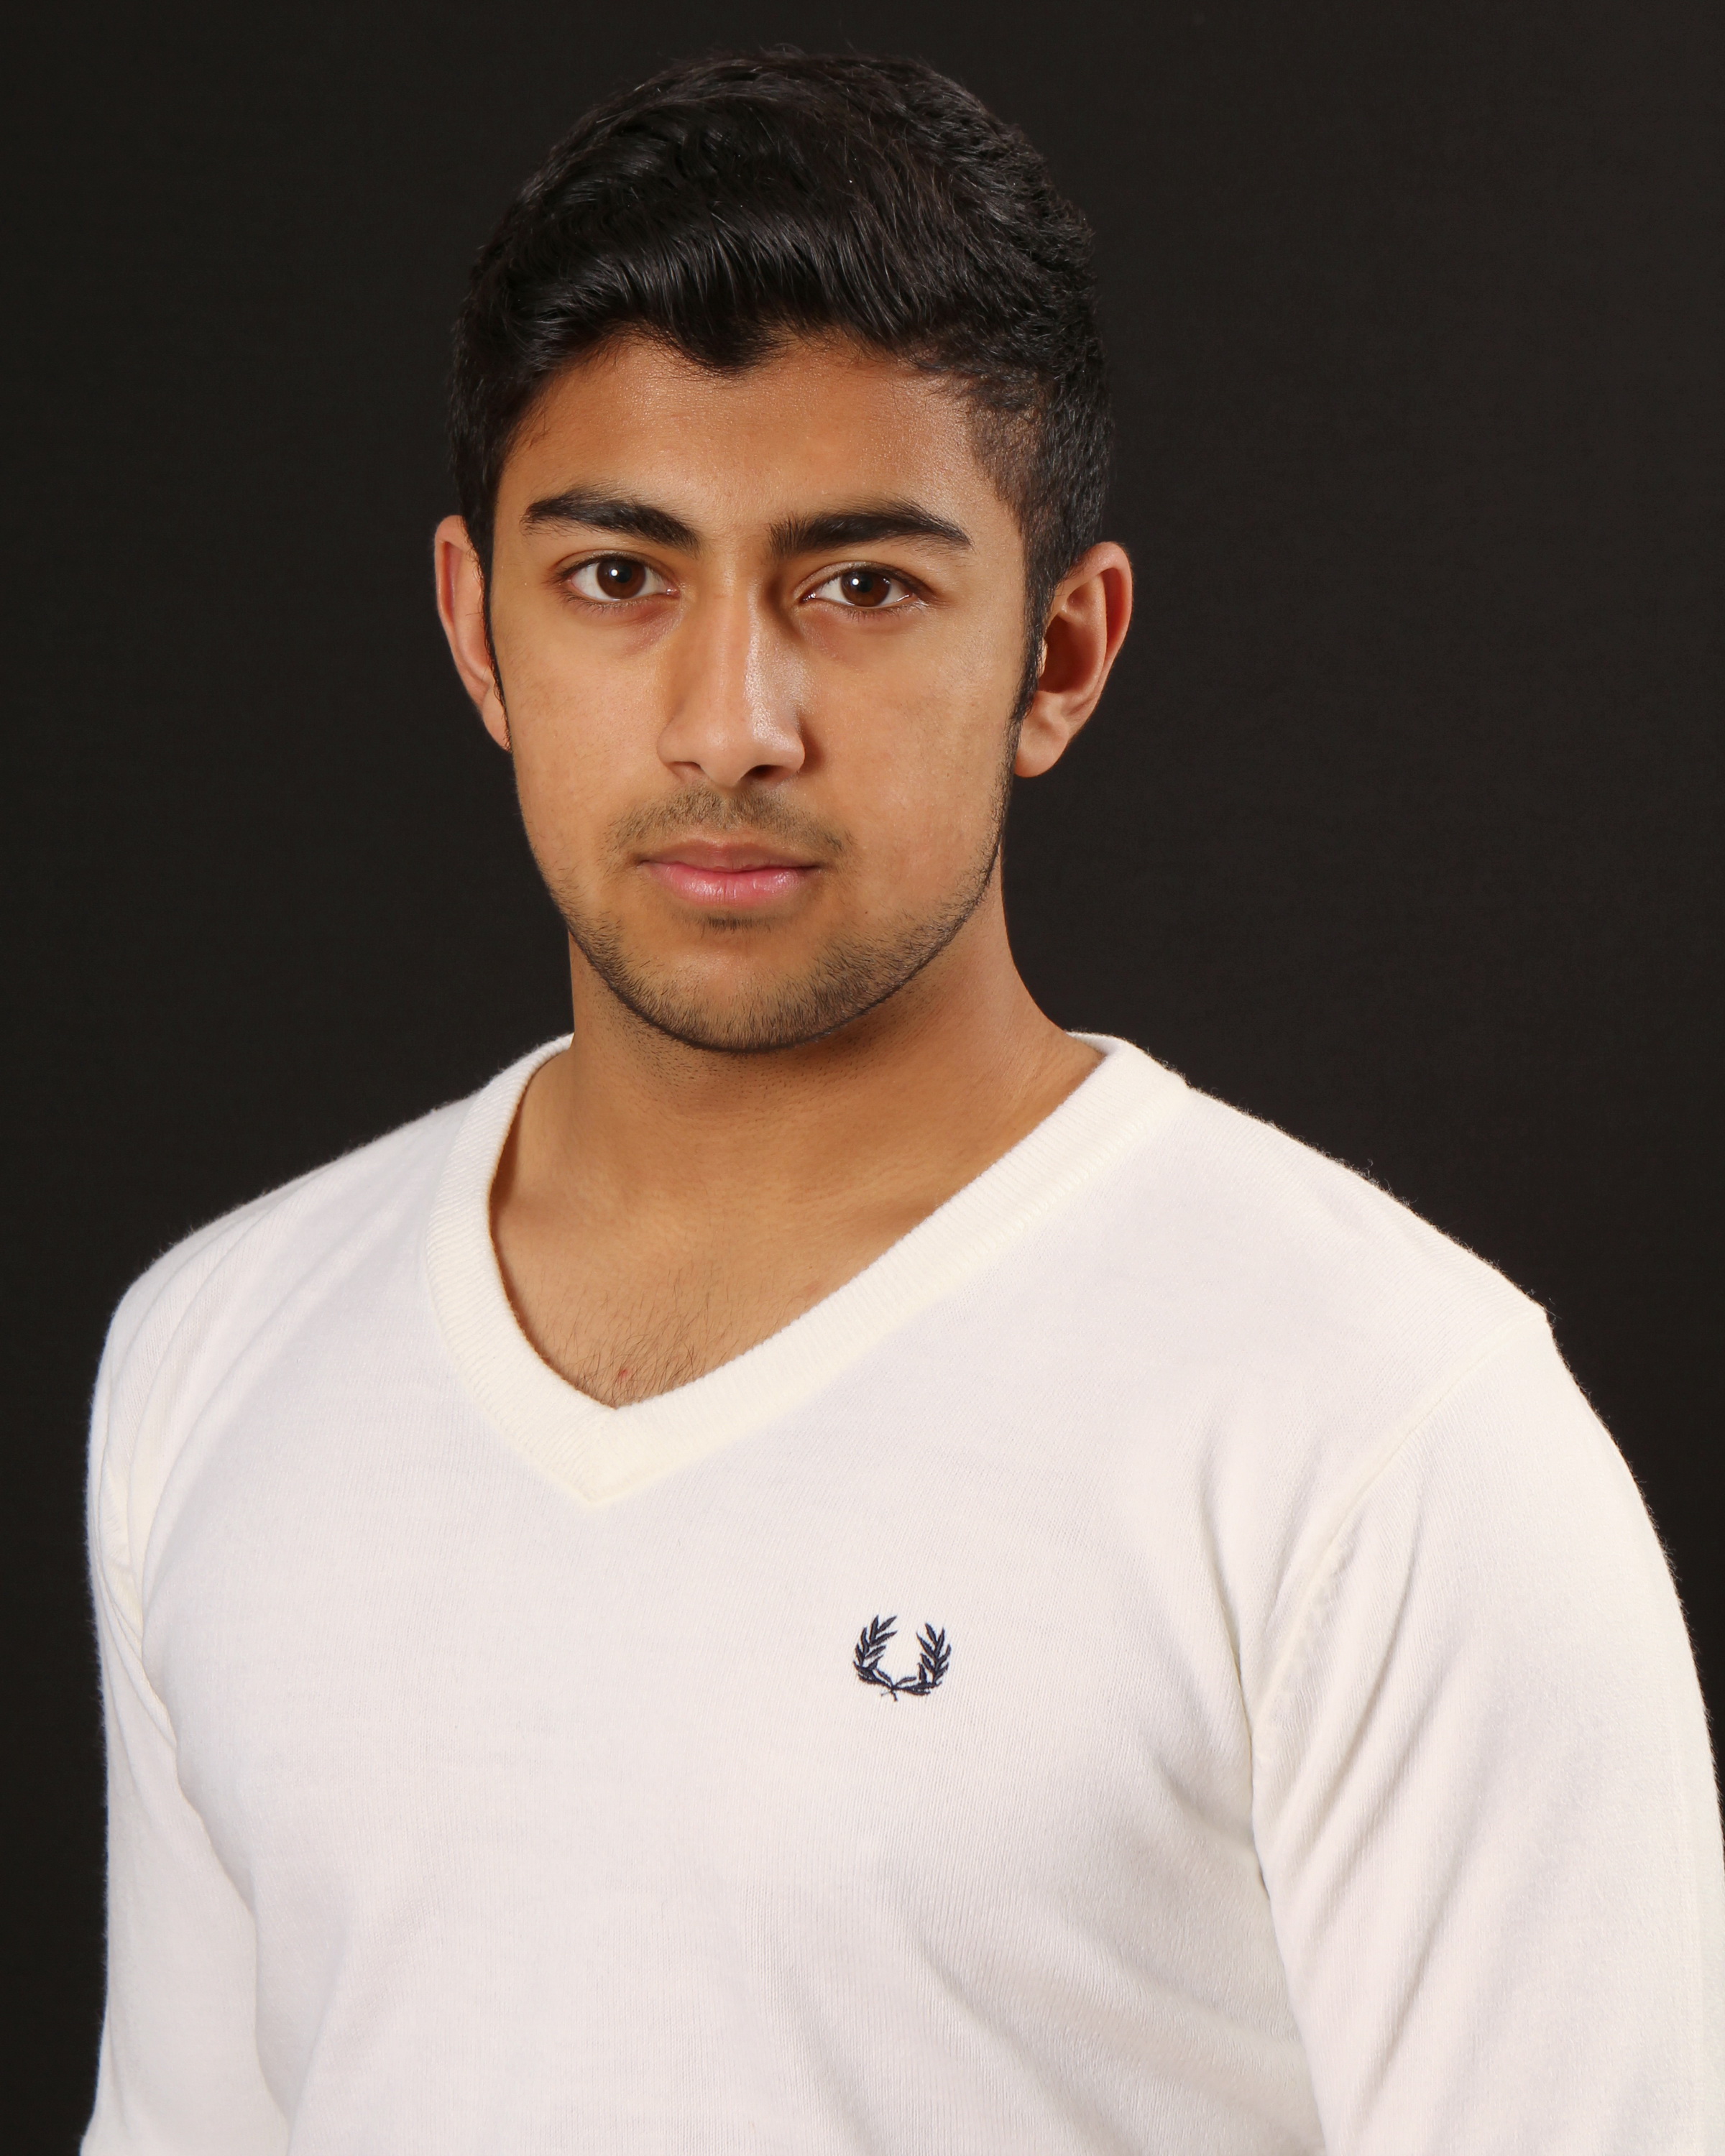 Subhan Iqbal born: 16th December in Berkshire. Mature, Versatile and focussed. Participated in LAMDA Exams, receiving distinctions and media accolade. Lead roles in amateur dramatics, performed in several theatres and completed debut feature film.